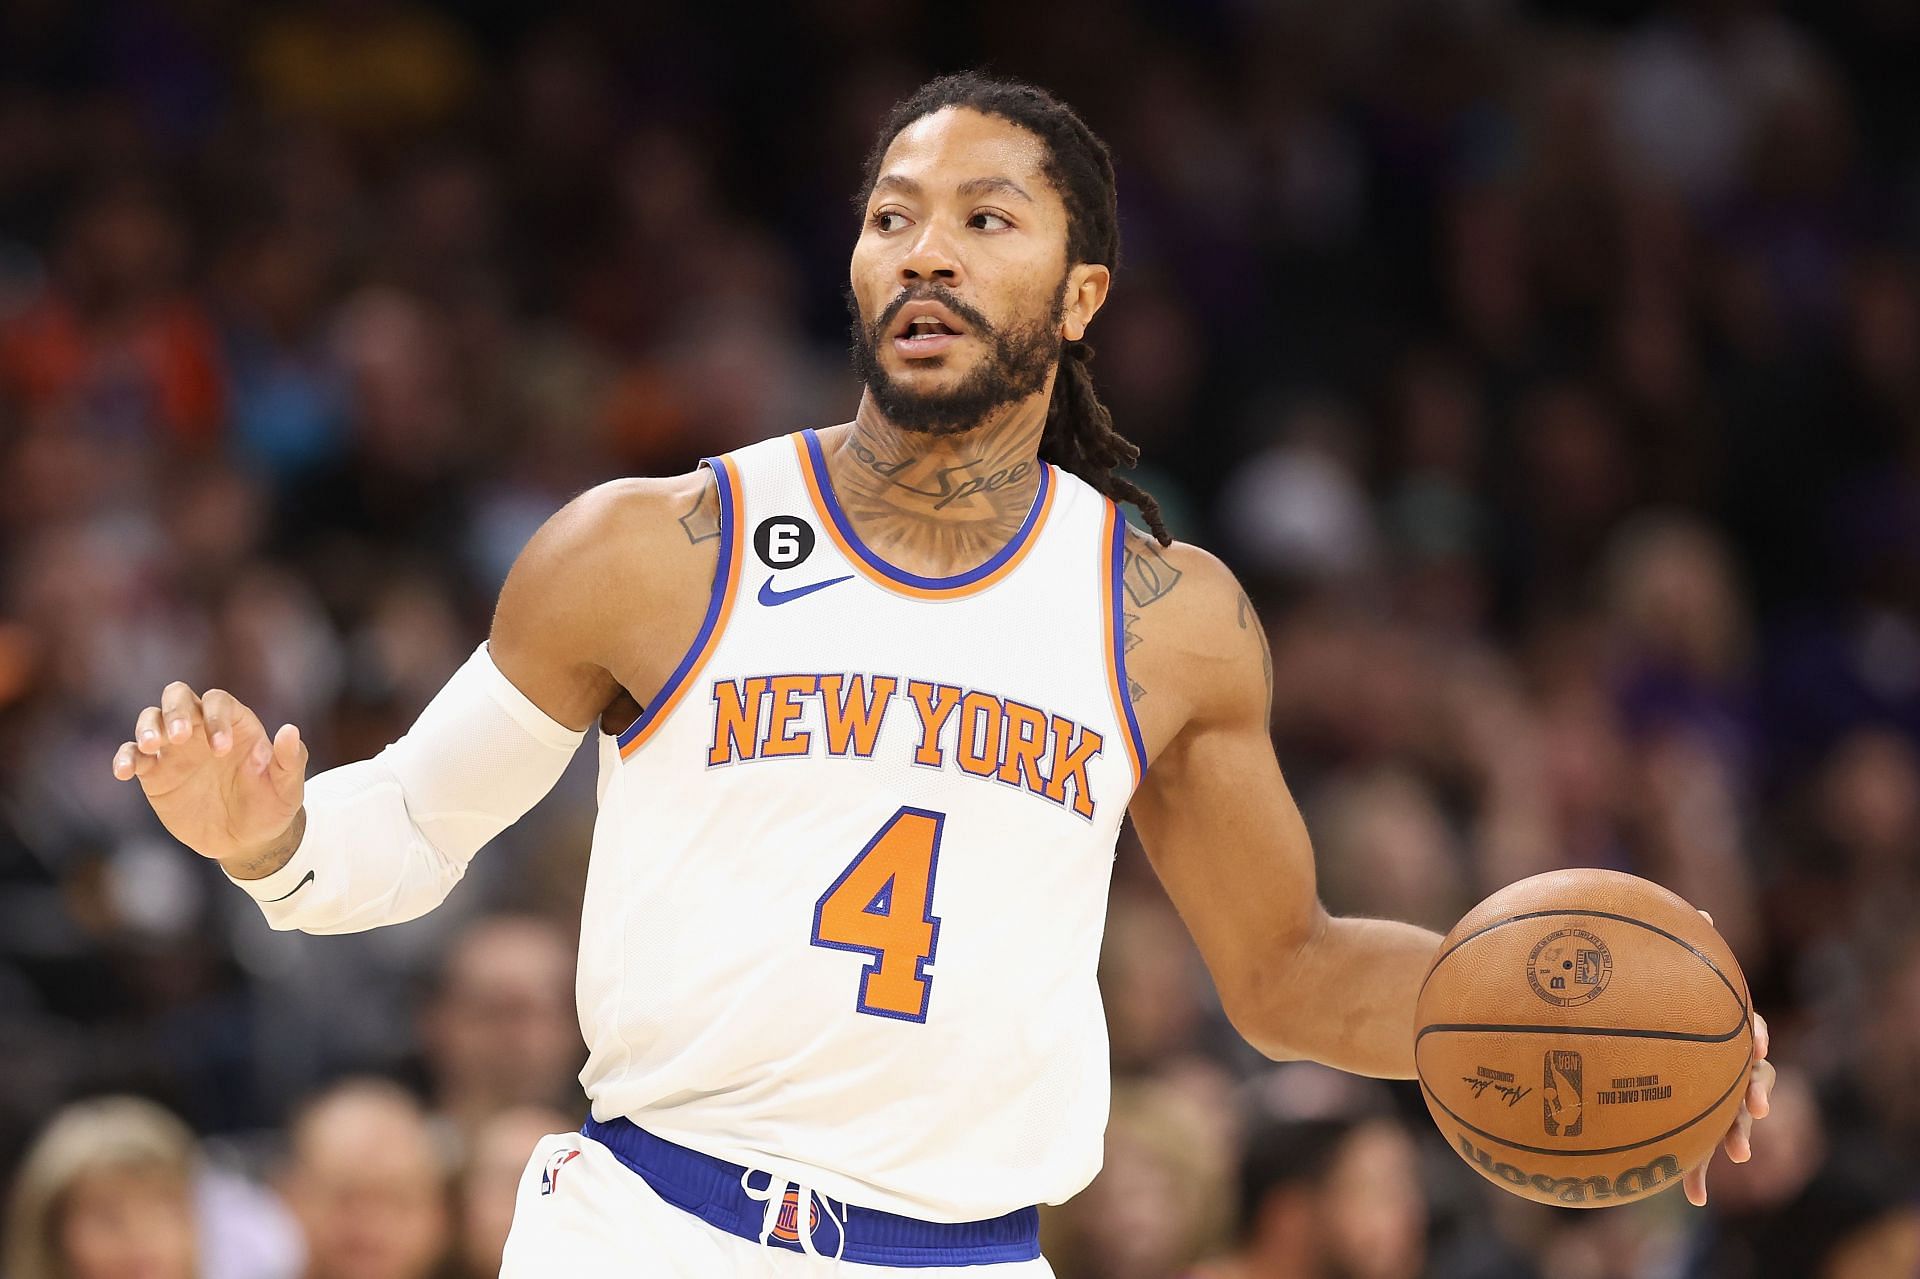 Derrick Rose is also on the New York Knicks depth chart (Image via Getty Images)